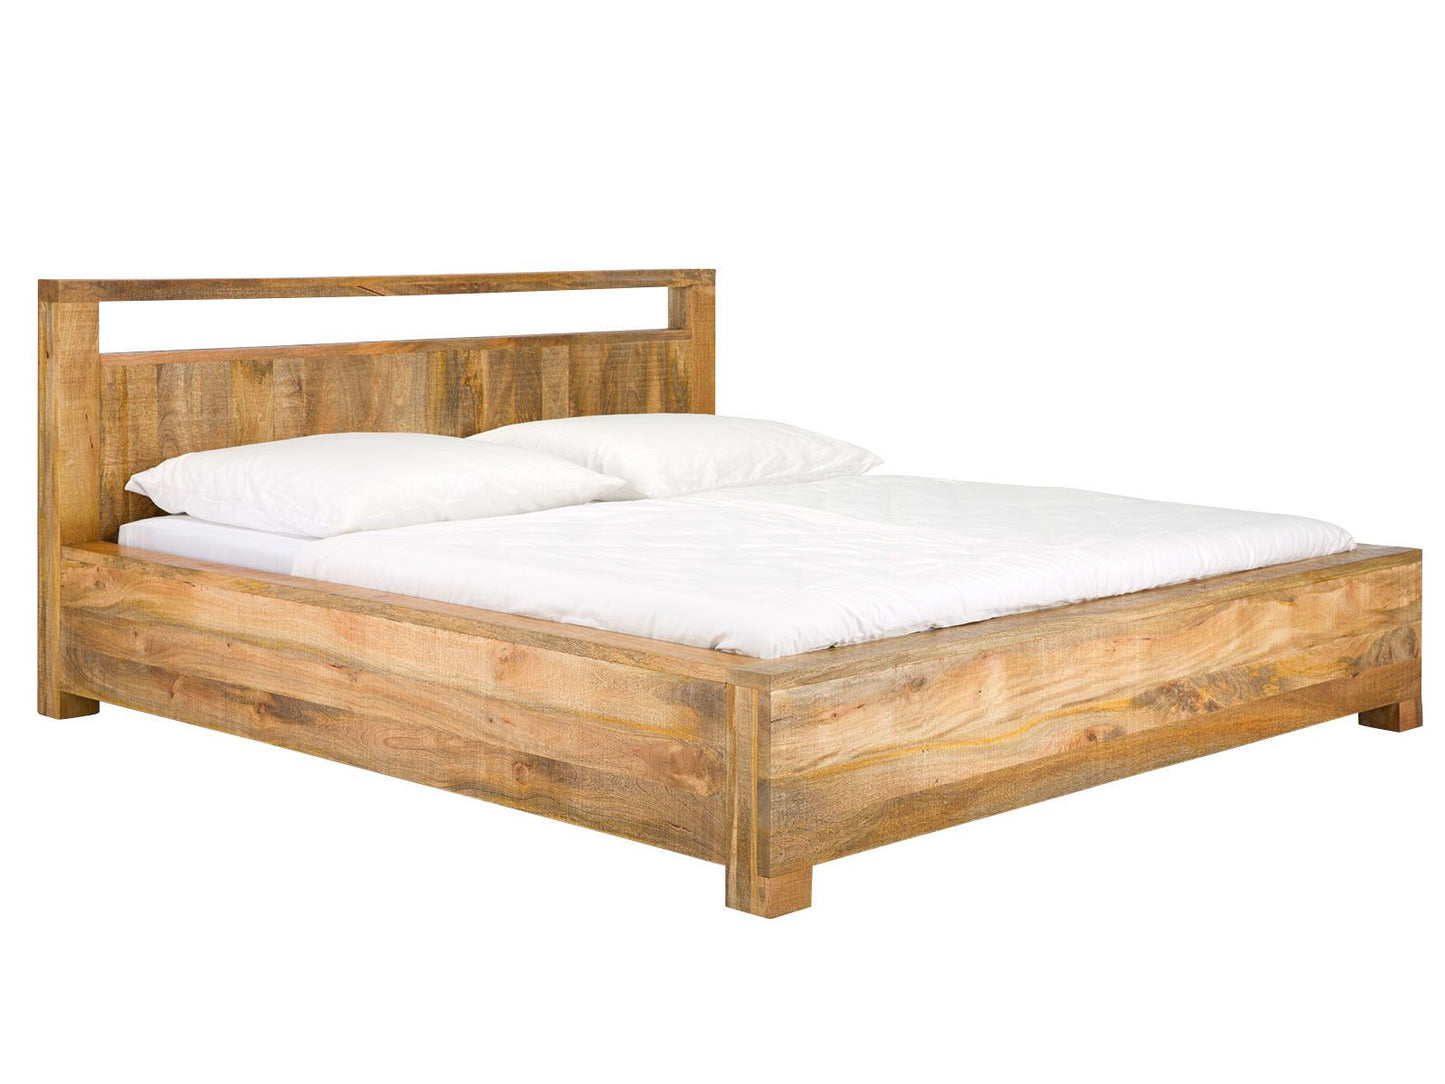 King bed made of solid mango wood